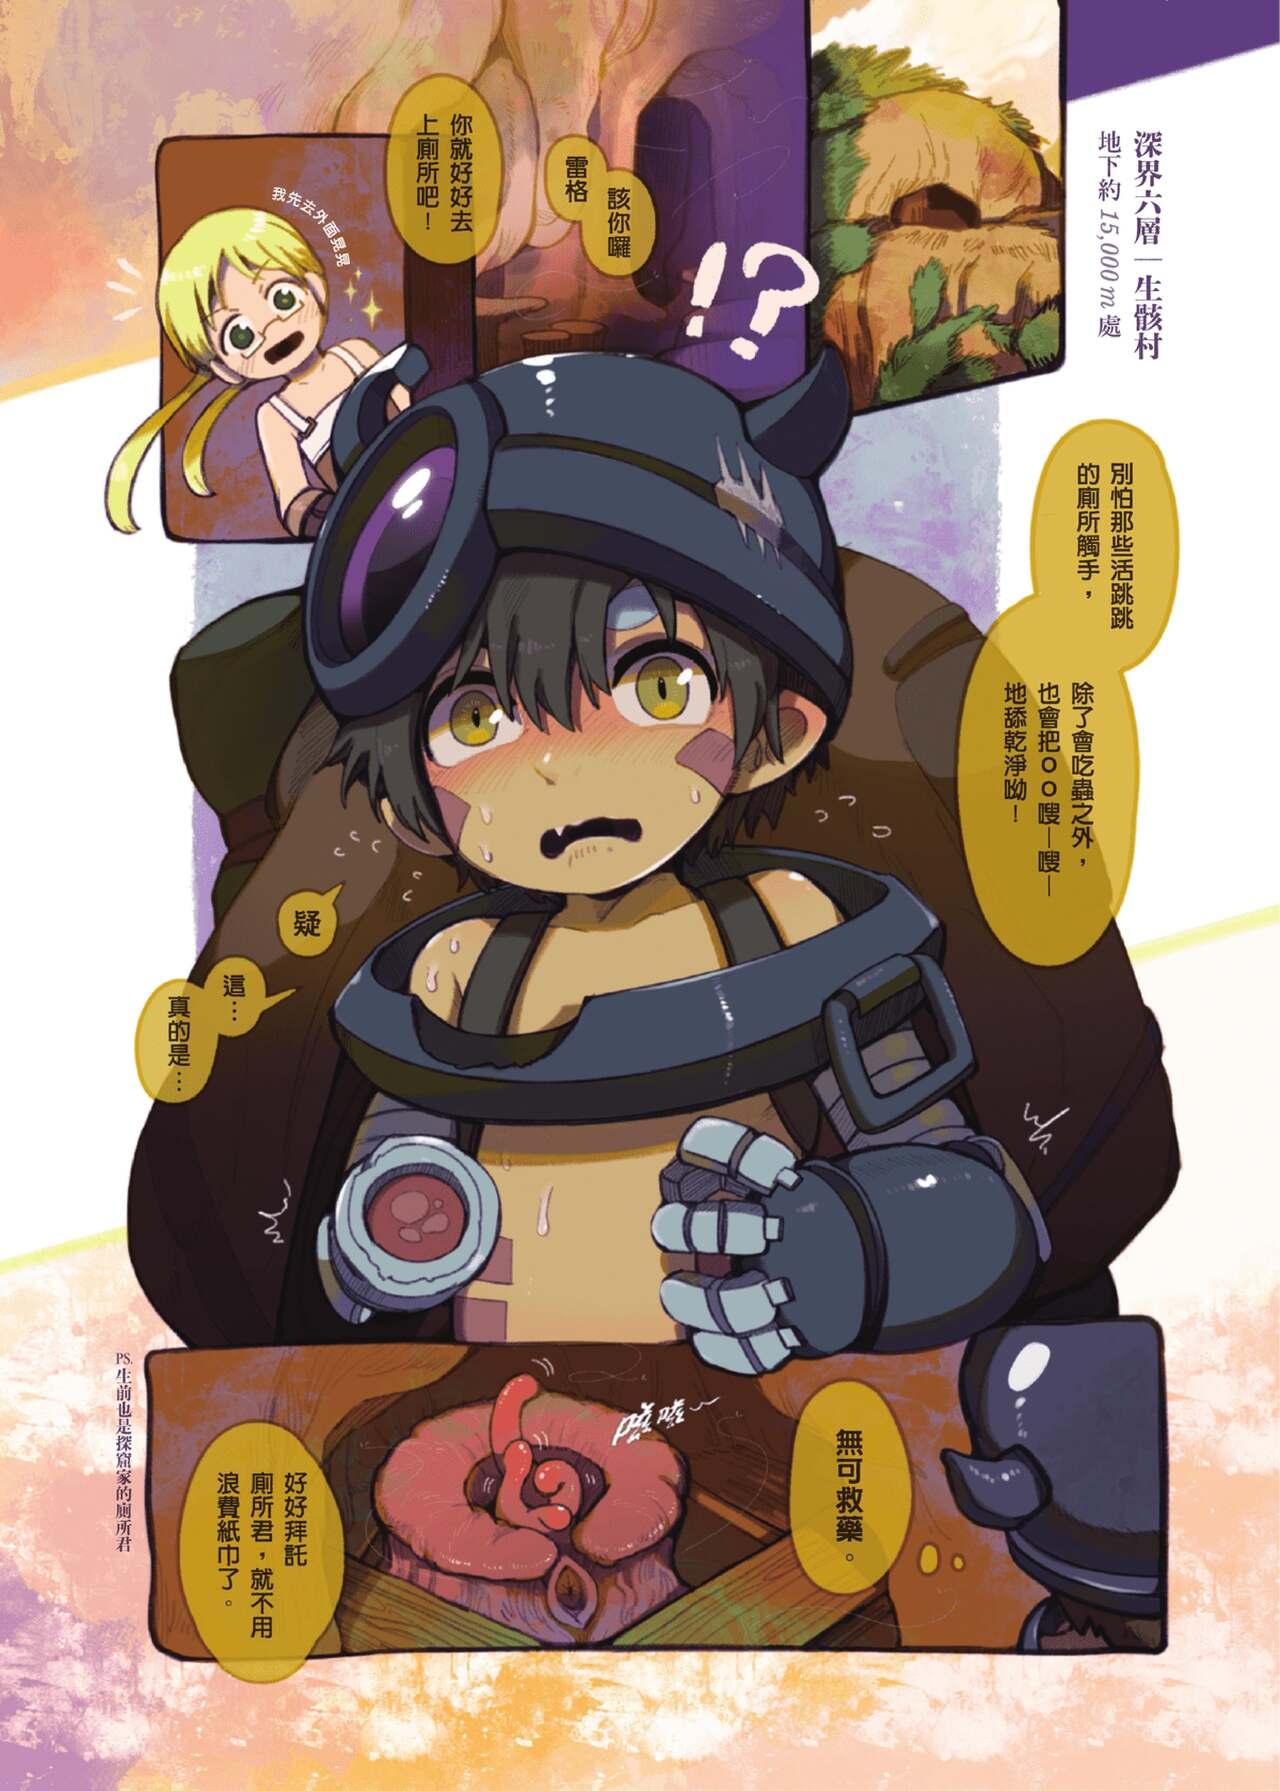 Celebrity Sex 【來自深淵】深淵的盥洗 The Washing in the Abyss｜雷格Reg 觸手本-v1 - Made in abyss Neighbor - Page 3